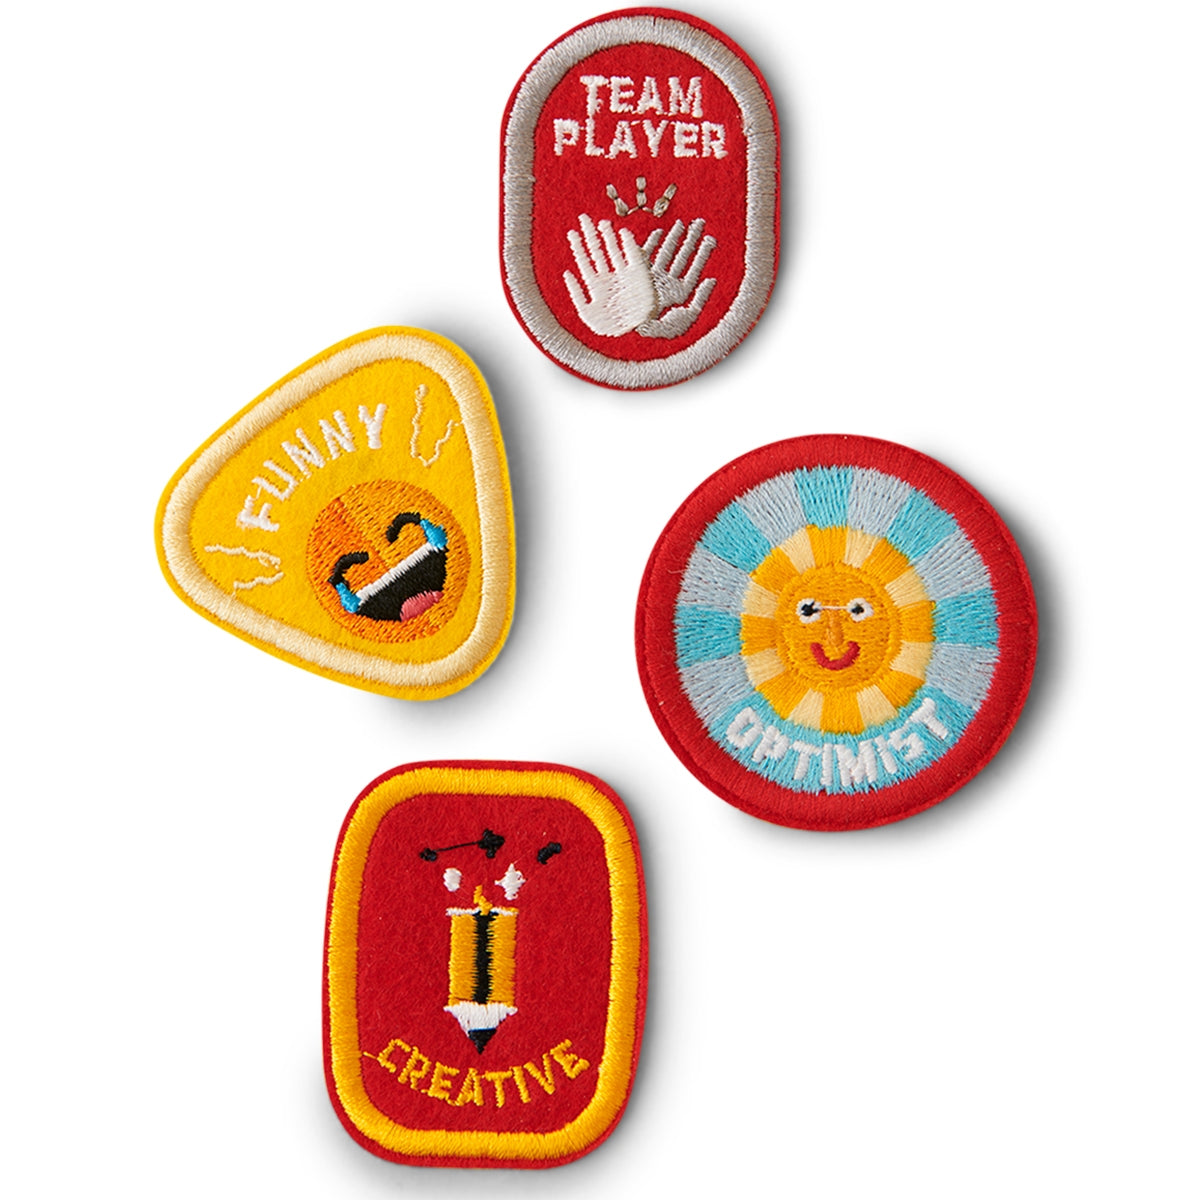 Set of 4 Character Badge Patches designed for children, featuring the words 'Creative, Funny, Team Player, Optimist' with vibrant colors, adhesive and iron-on backing, displayed on a white background.